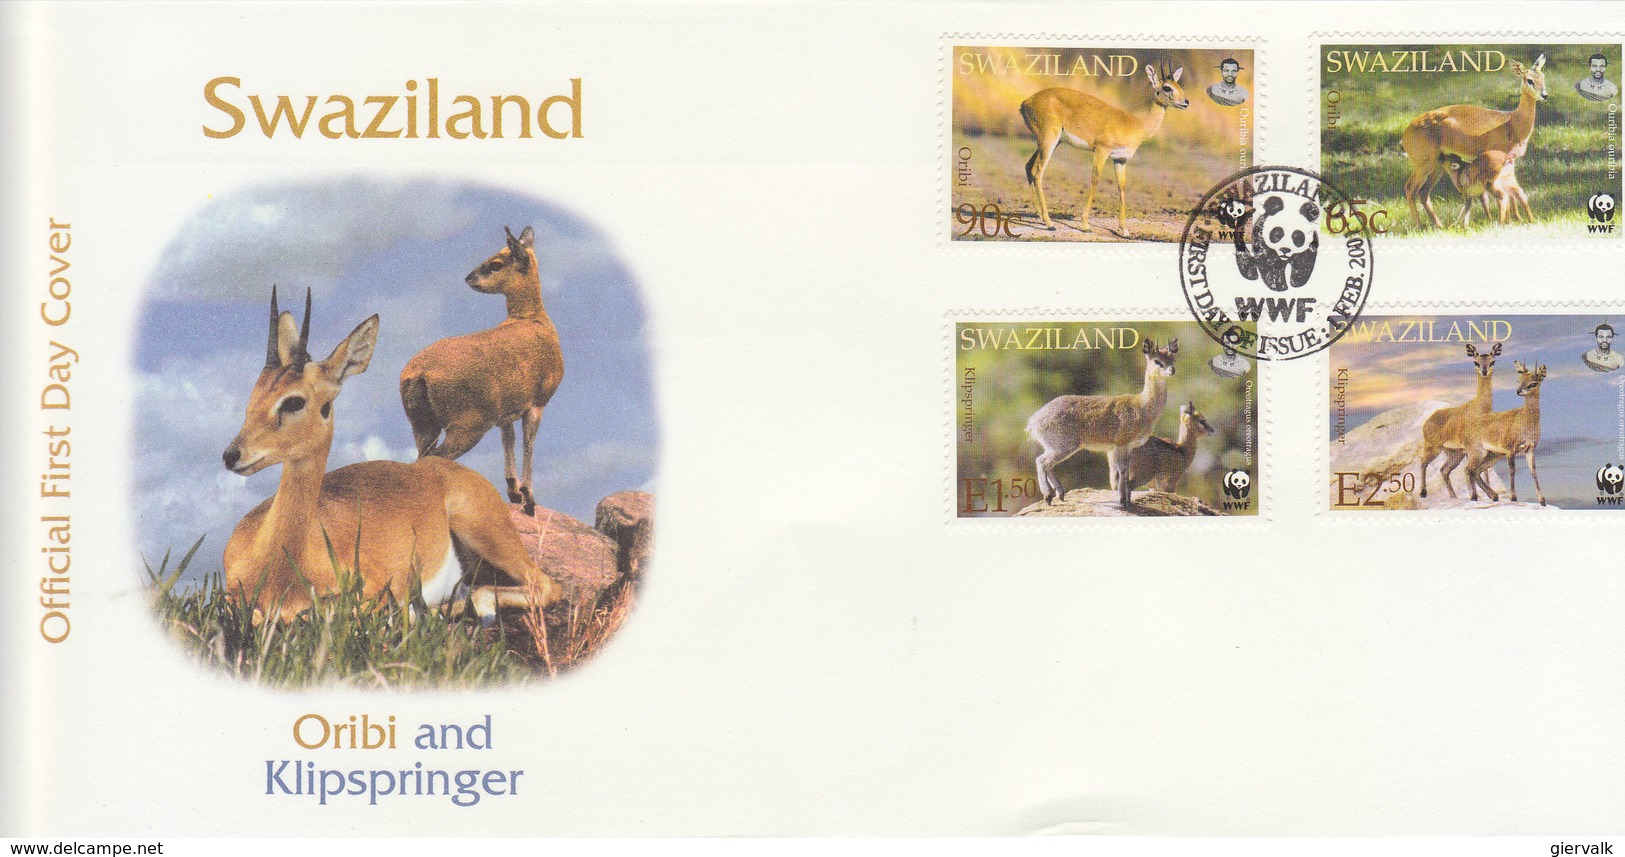 SWAZILAND 2001 WWF FDC With KLIPSPRINGER Local Issue - FDC